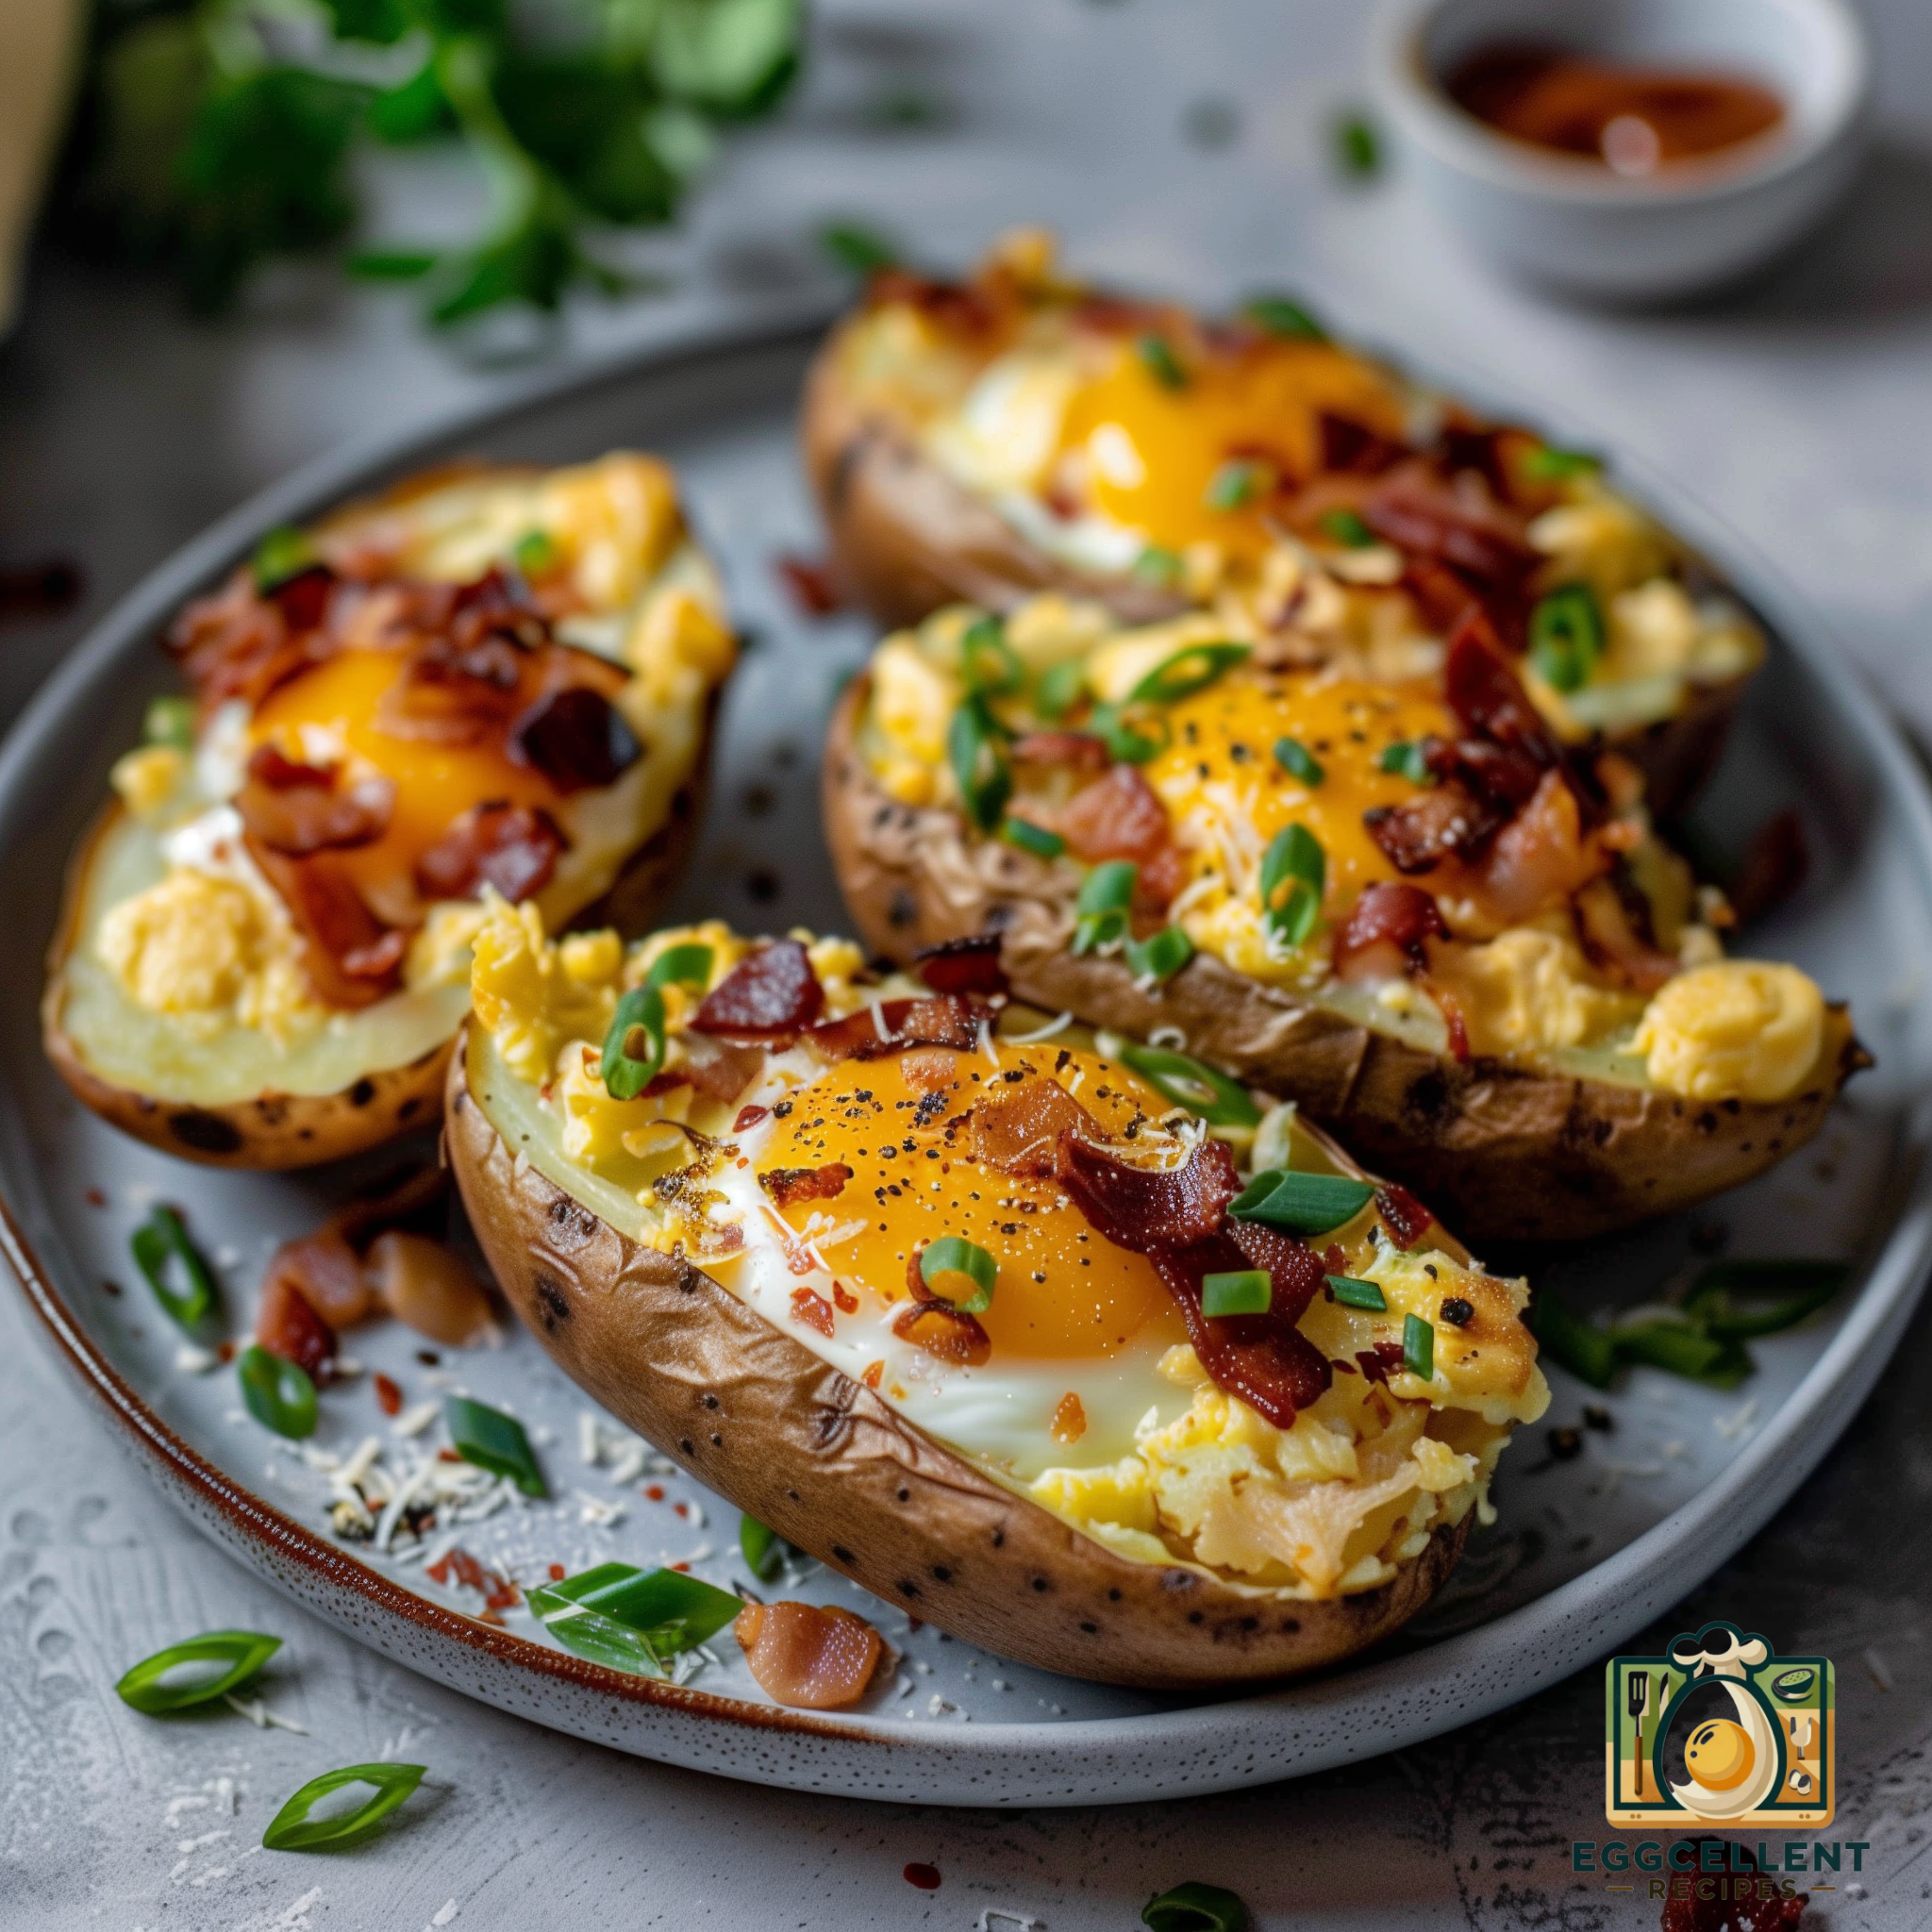 Egg-Stuffed Baked Potatoes with Bacon and Cheese Recipe